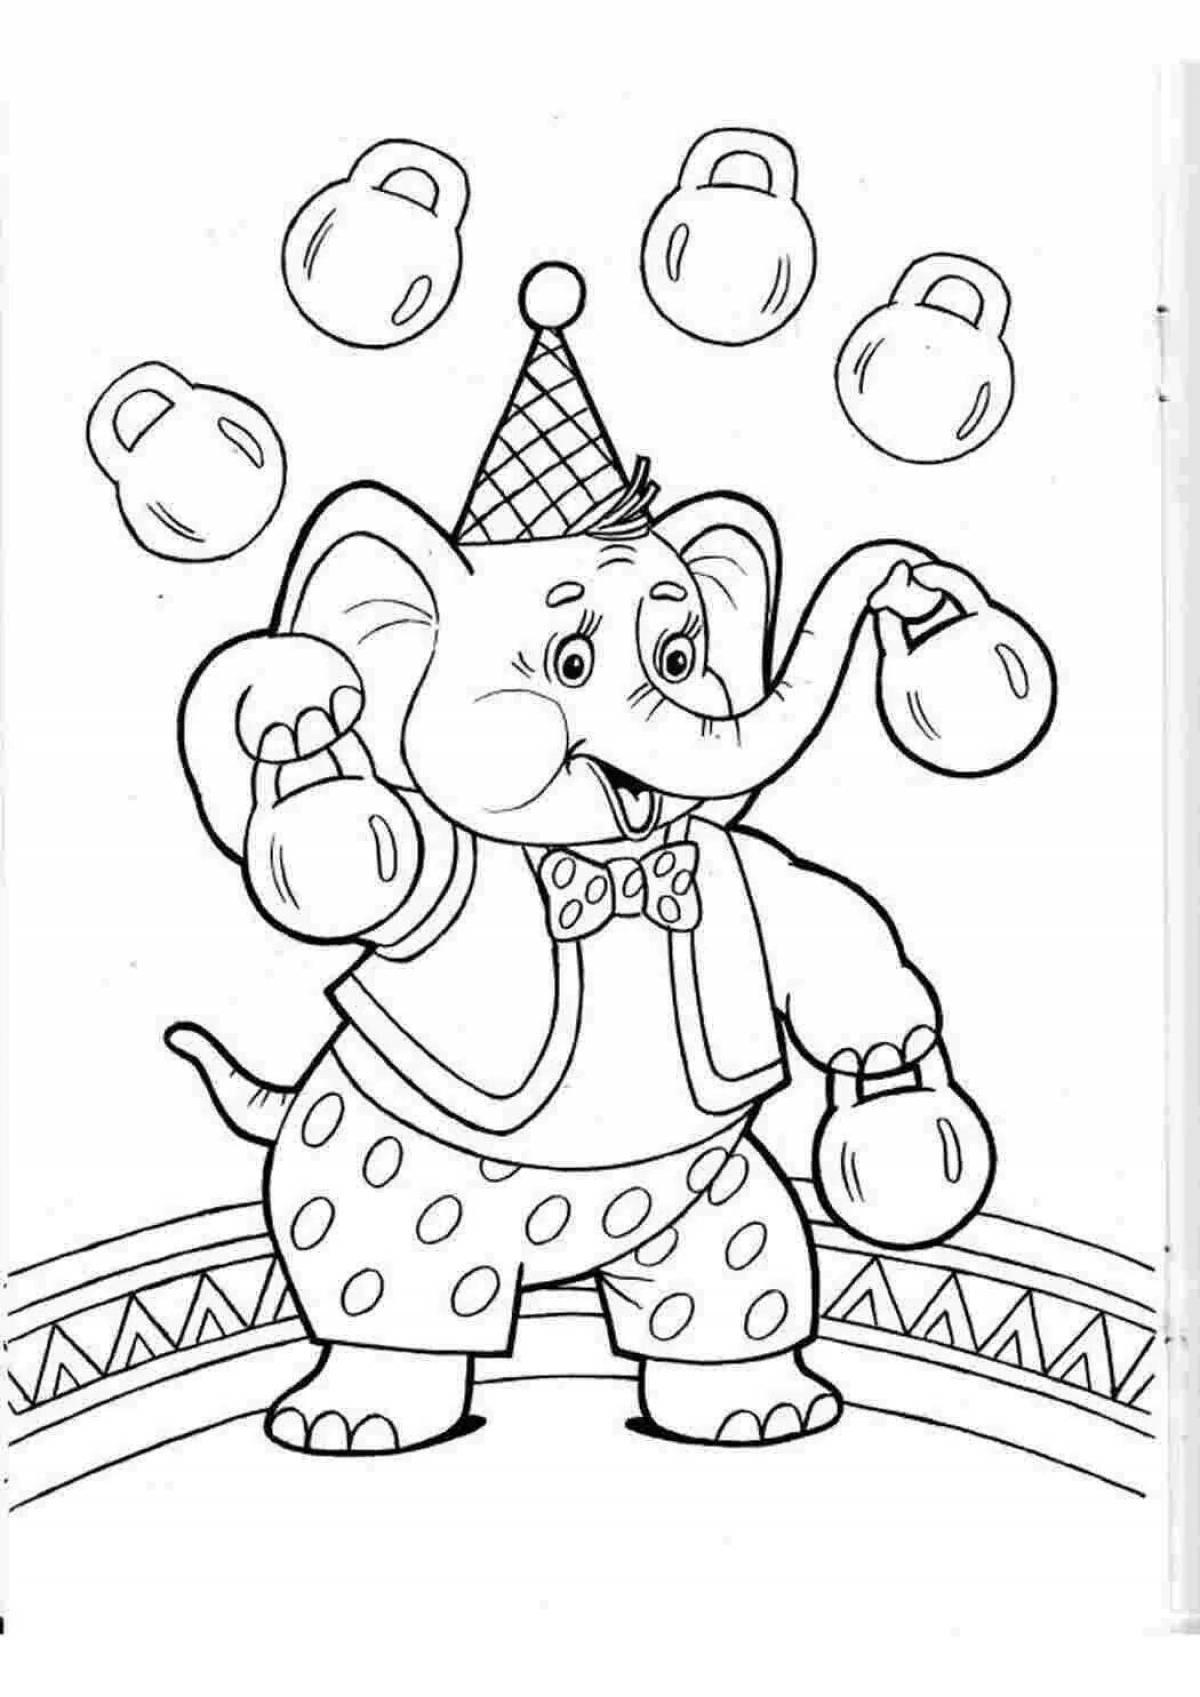 Coloring live circus elephant